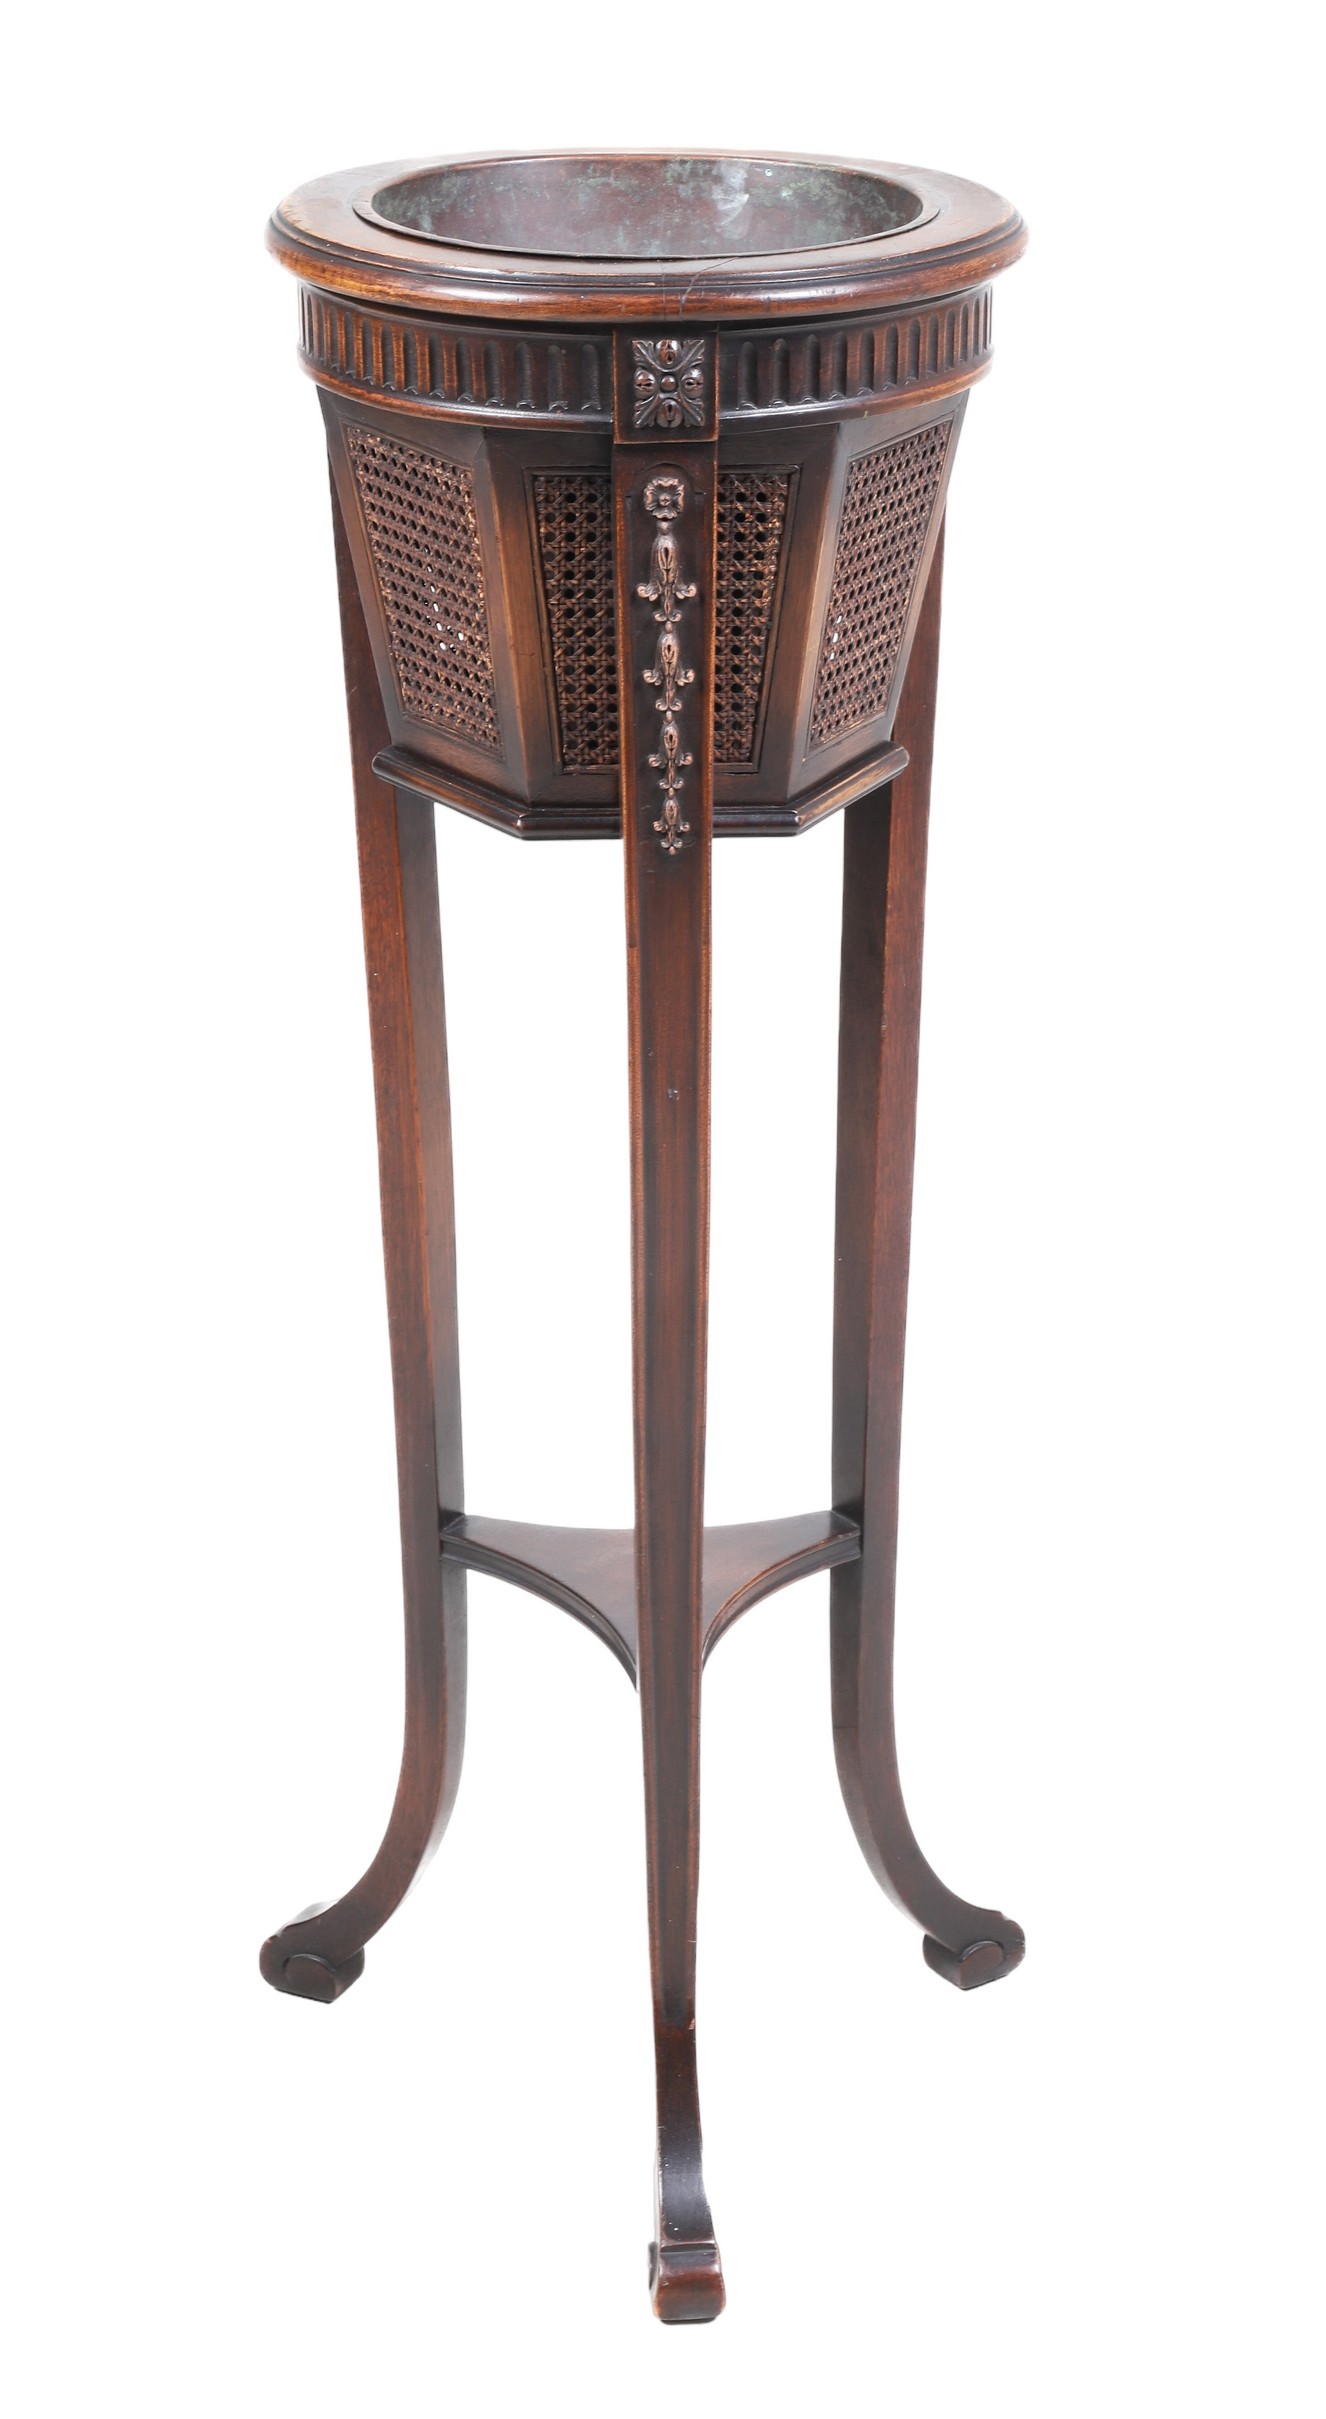 French style mahogany and caned